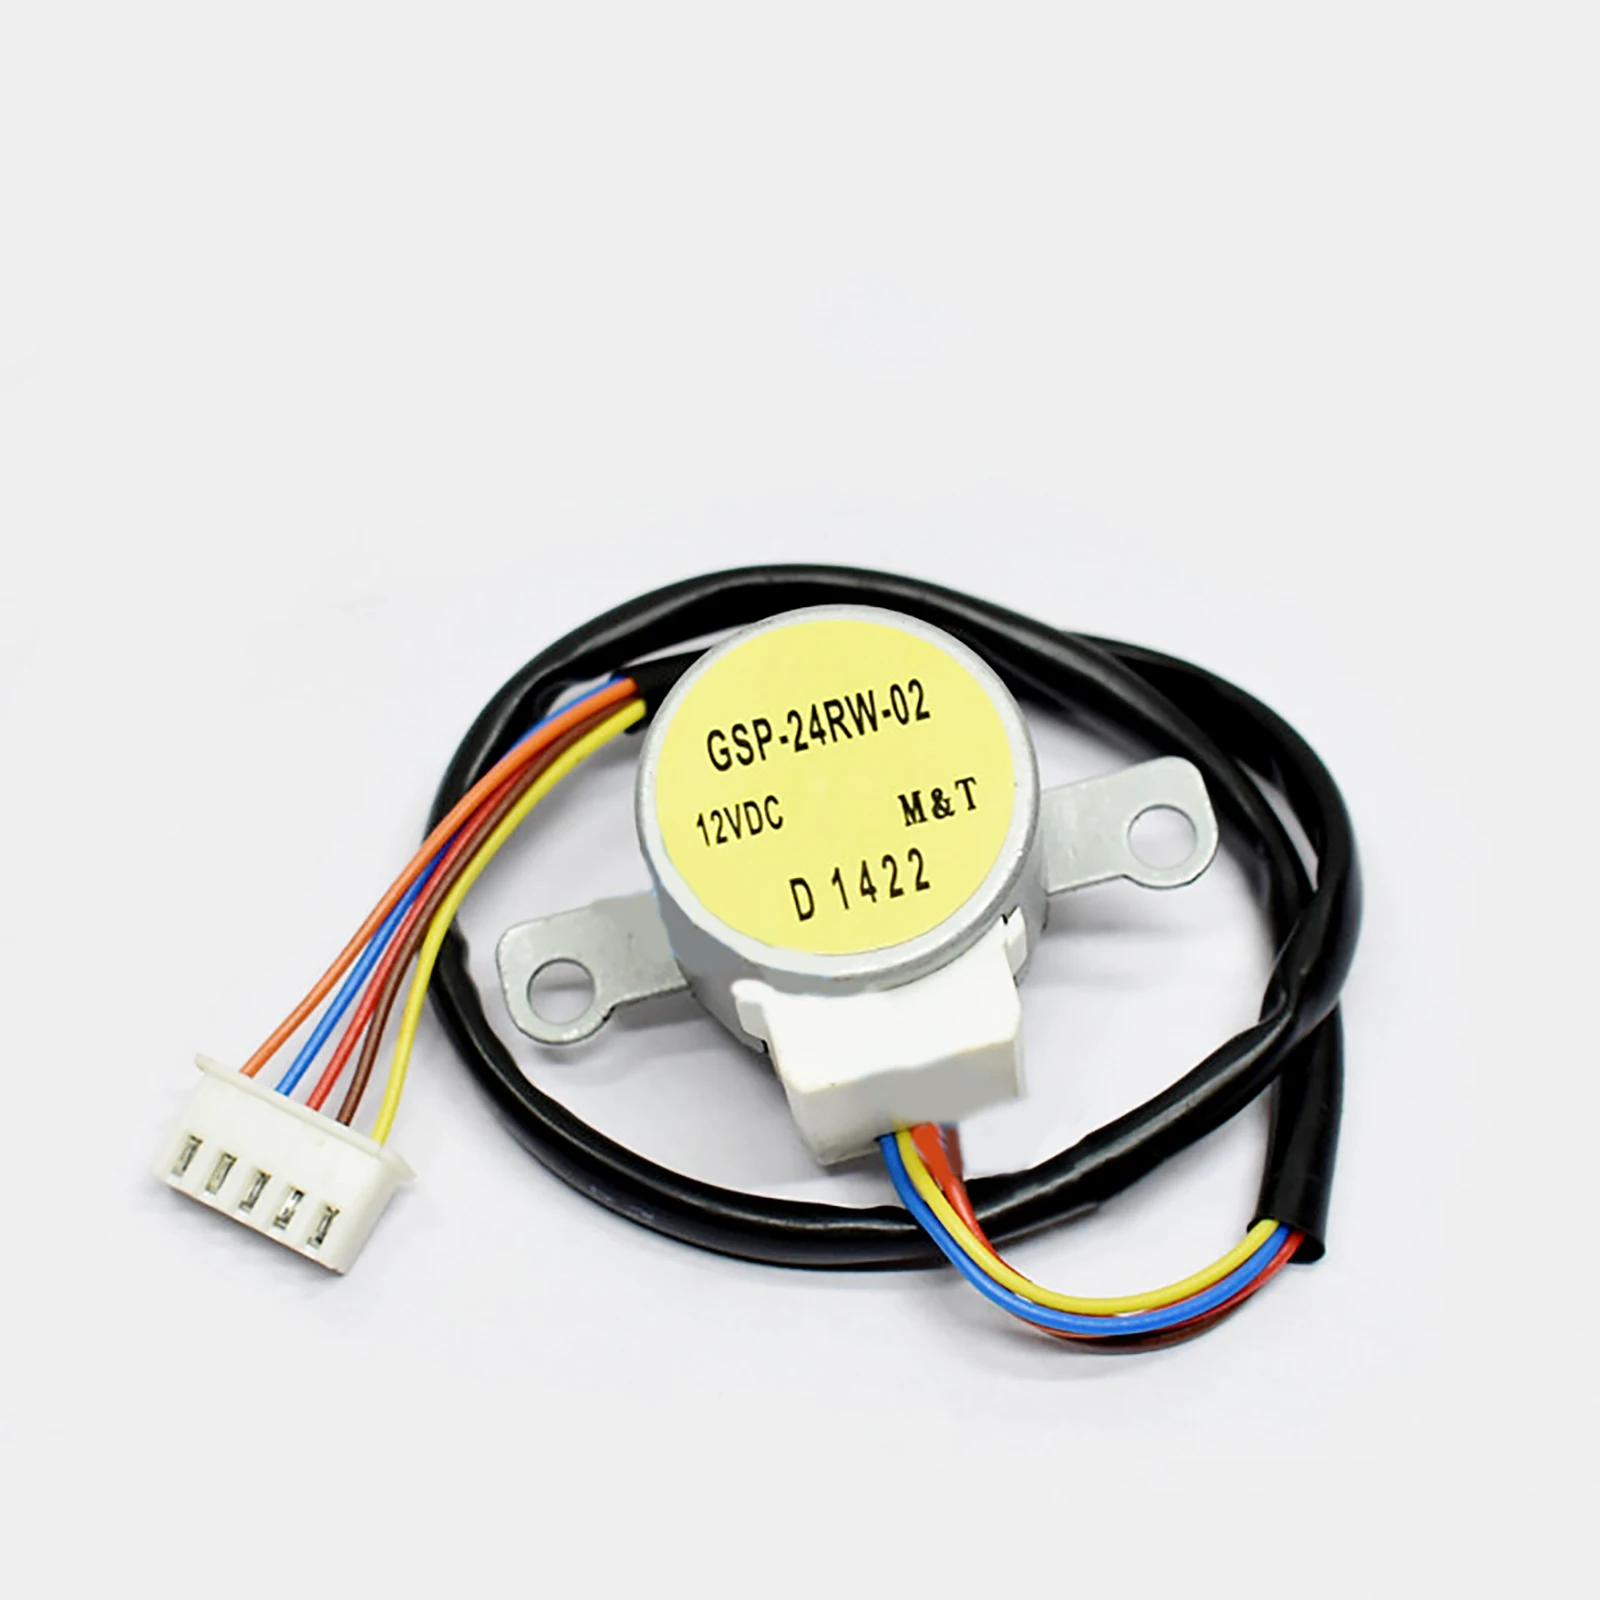 

Swinging Blade Motor for LG Air Conditioner MP24 Air Guide Stepper Motor 12V GSP-24RW-02 Air Conditioning Accessories